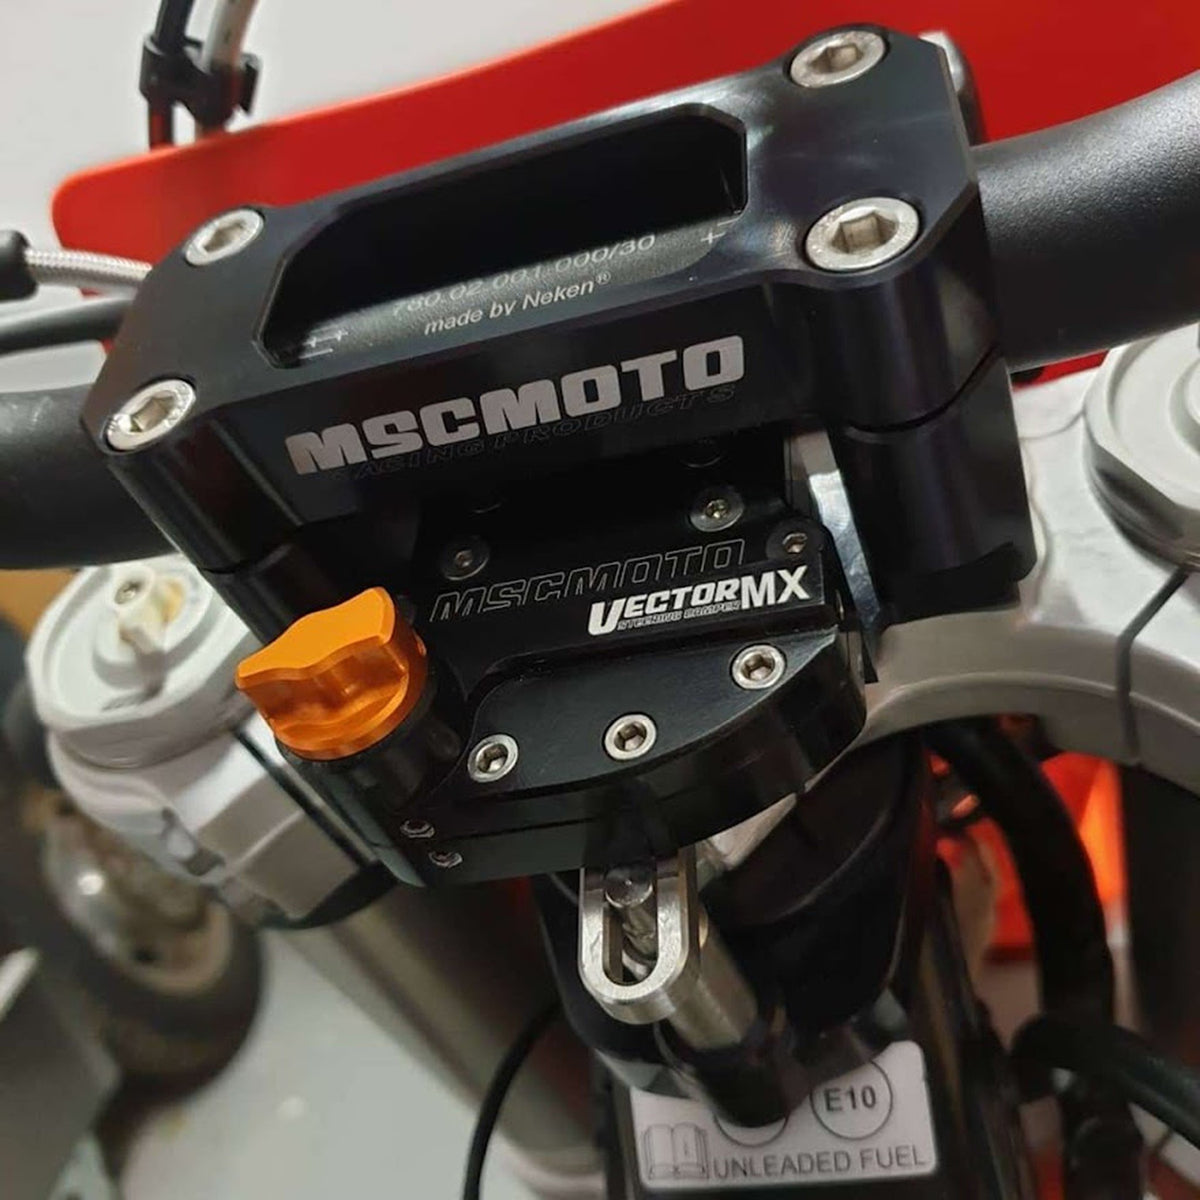 VectorMX Steering Damper Kit &quot;Down Under&quot; Mount (VEC0010) - GAS GAS MC 85, YAMAHA YZ85, VEC0010, Gas Gas MSC Moto, vectormx, Yamaha MSC Moto, Steering Dampers - Imported and distributed in North &amp; South America by Lindeco Genuine Powersports - Premier Powersports Equipment and Accessories for Motorcycle Enthusiasts, Professional Riders and Dealers.